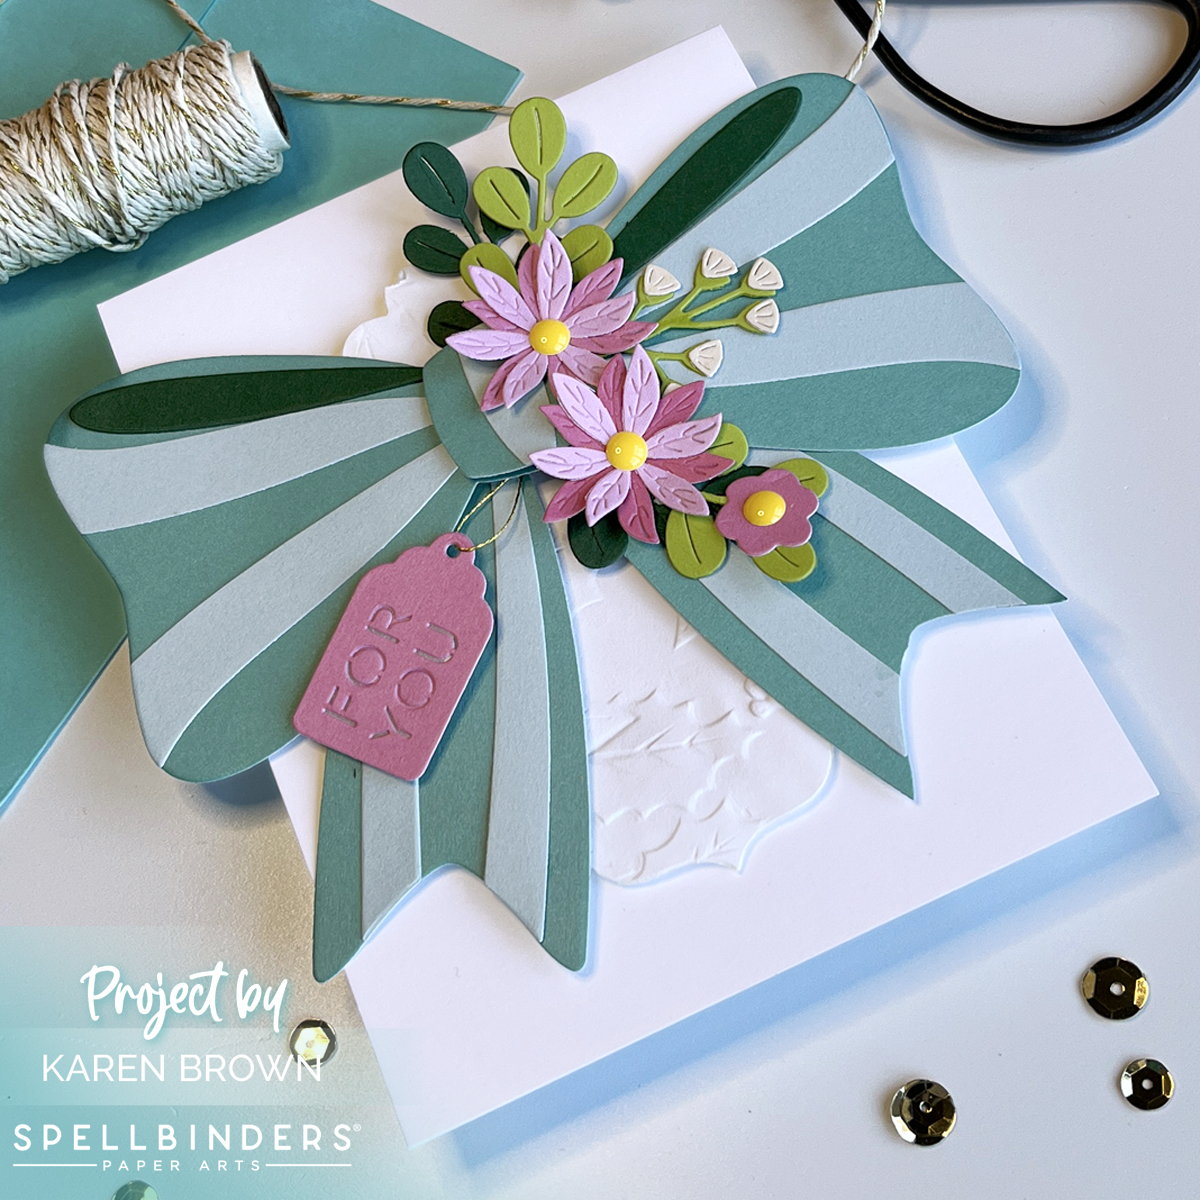 Spellbinders All Occasion die cut Bow + Petite Blooms and Sentiments